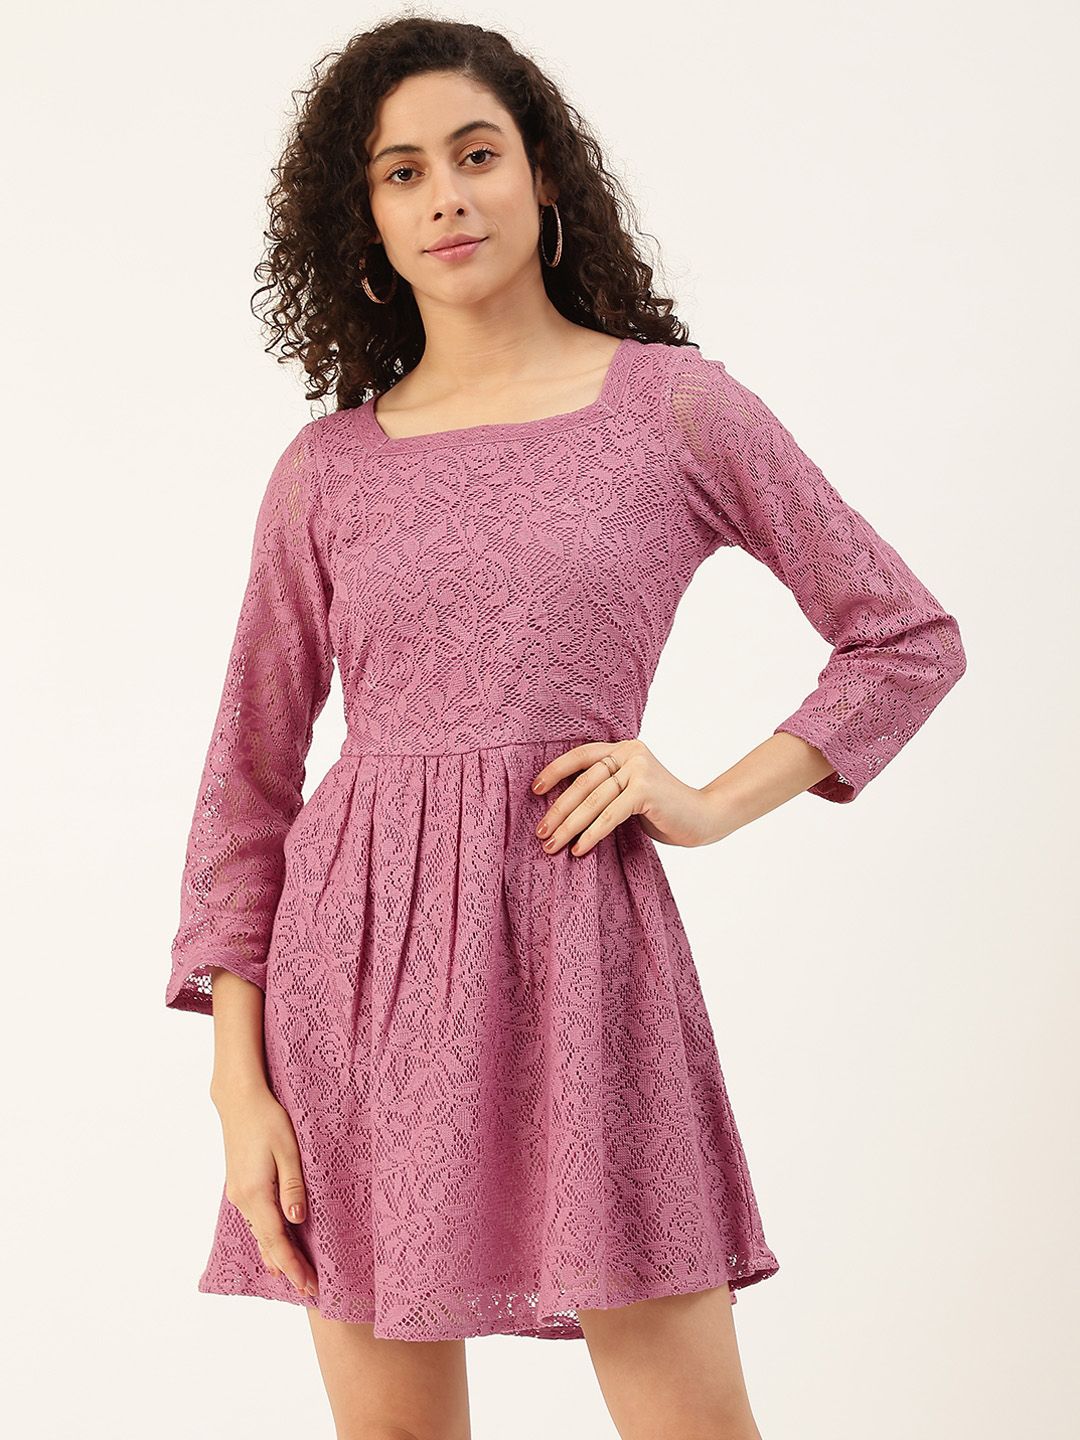 Maaesa Women Lavender Lace Belted A-Line Dress Price in India